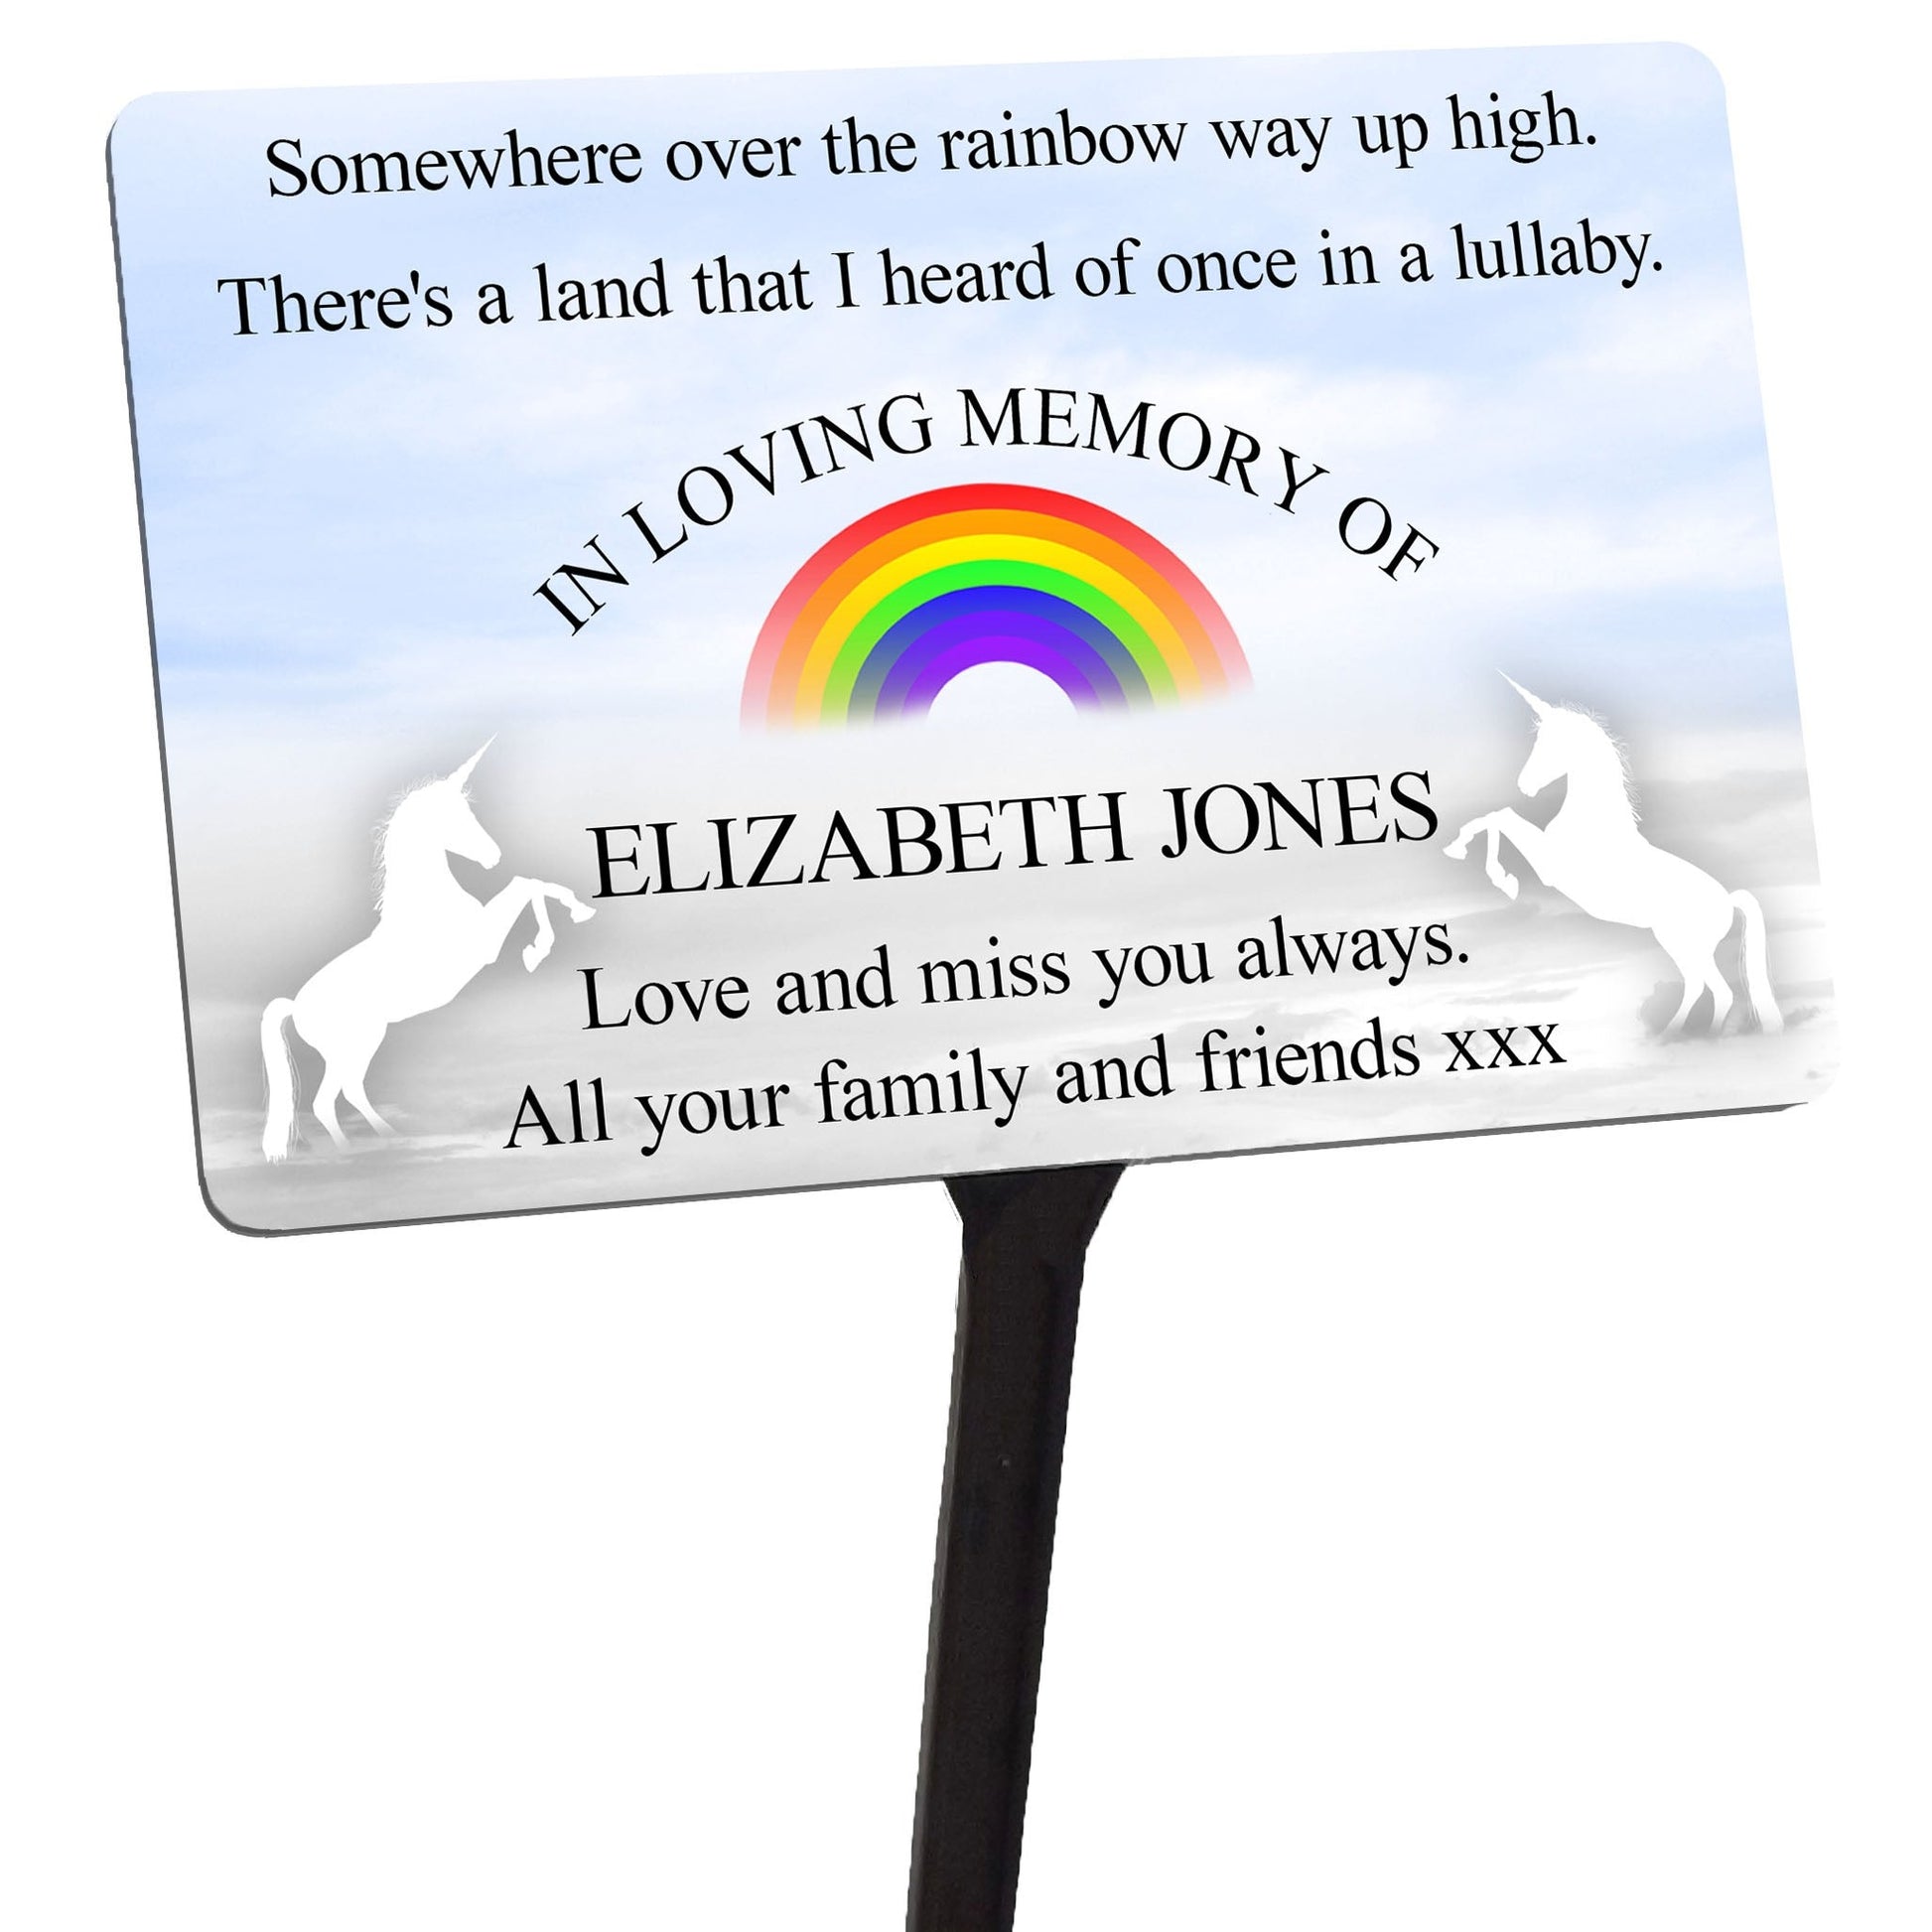 Sublimation In Loving Memory Plaque